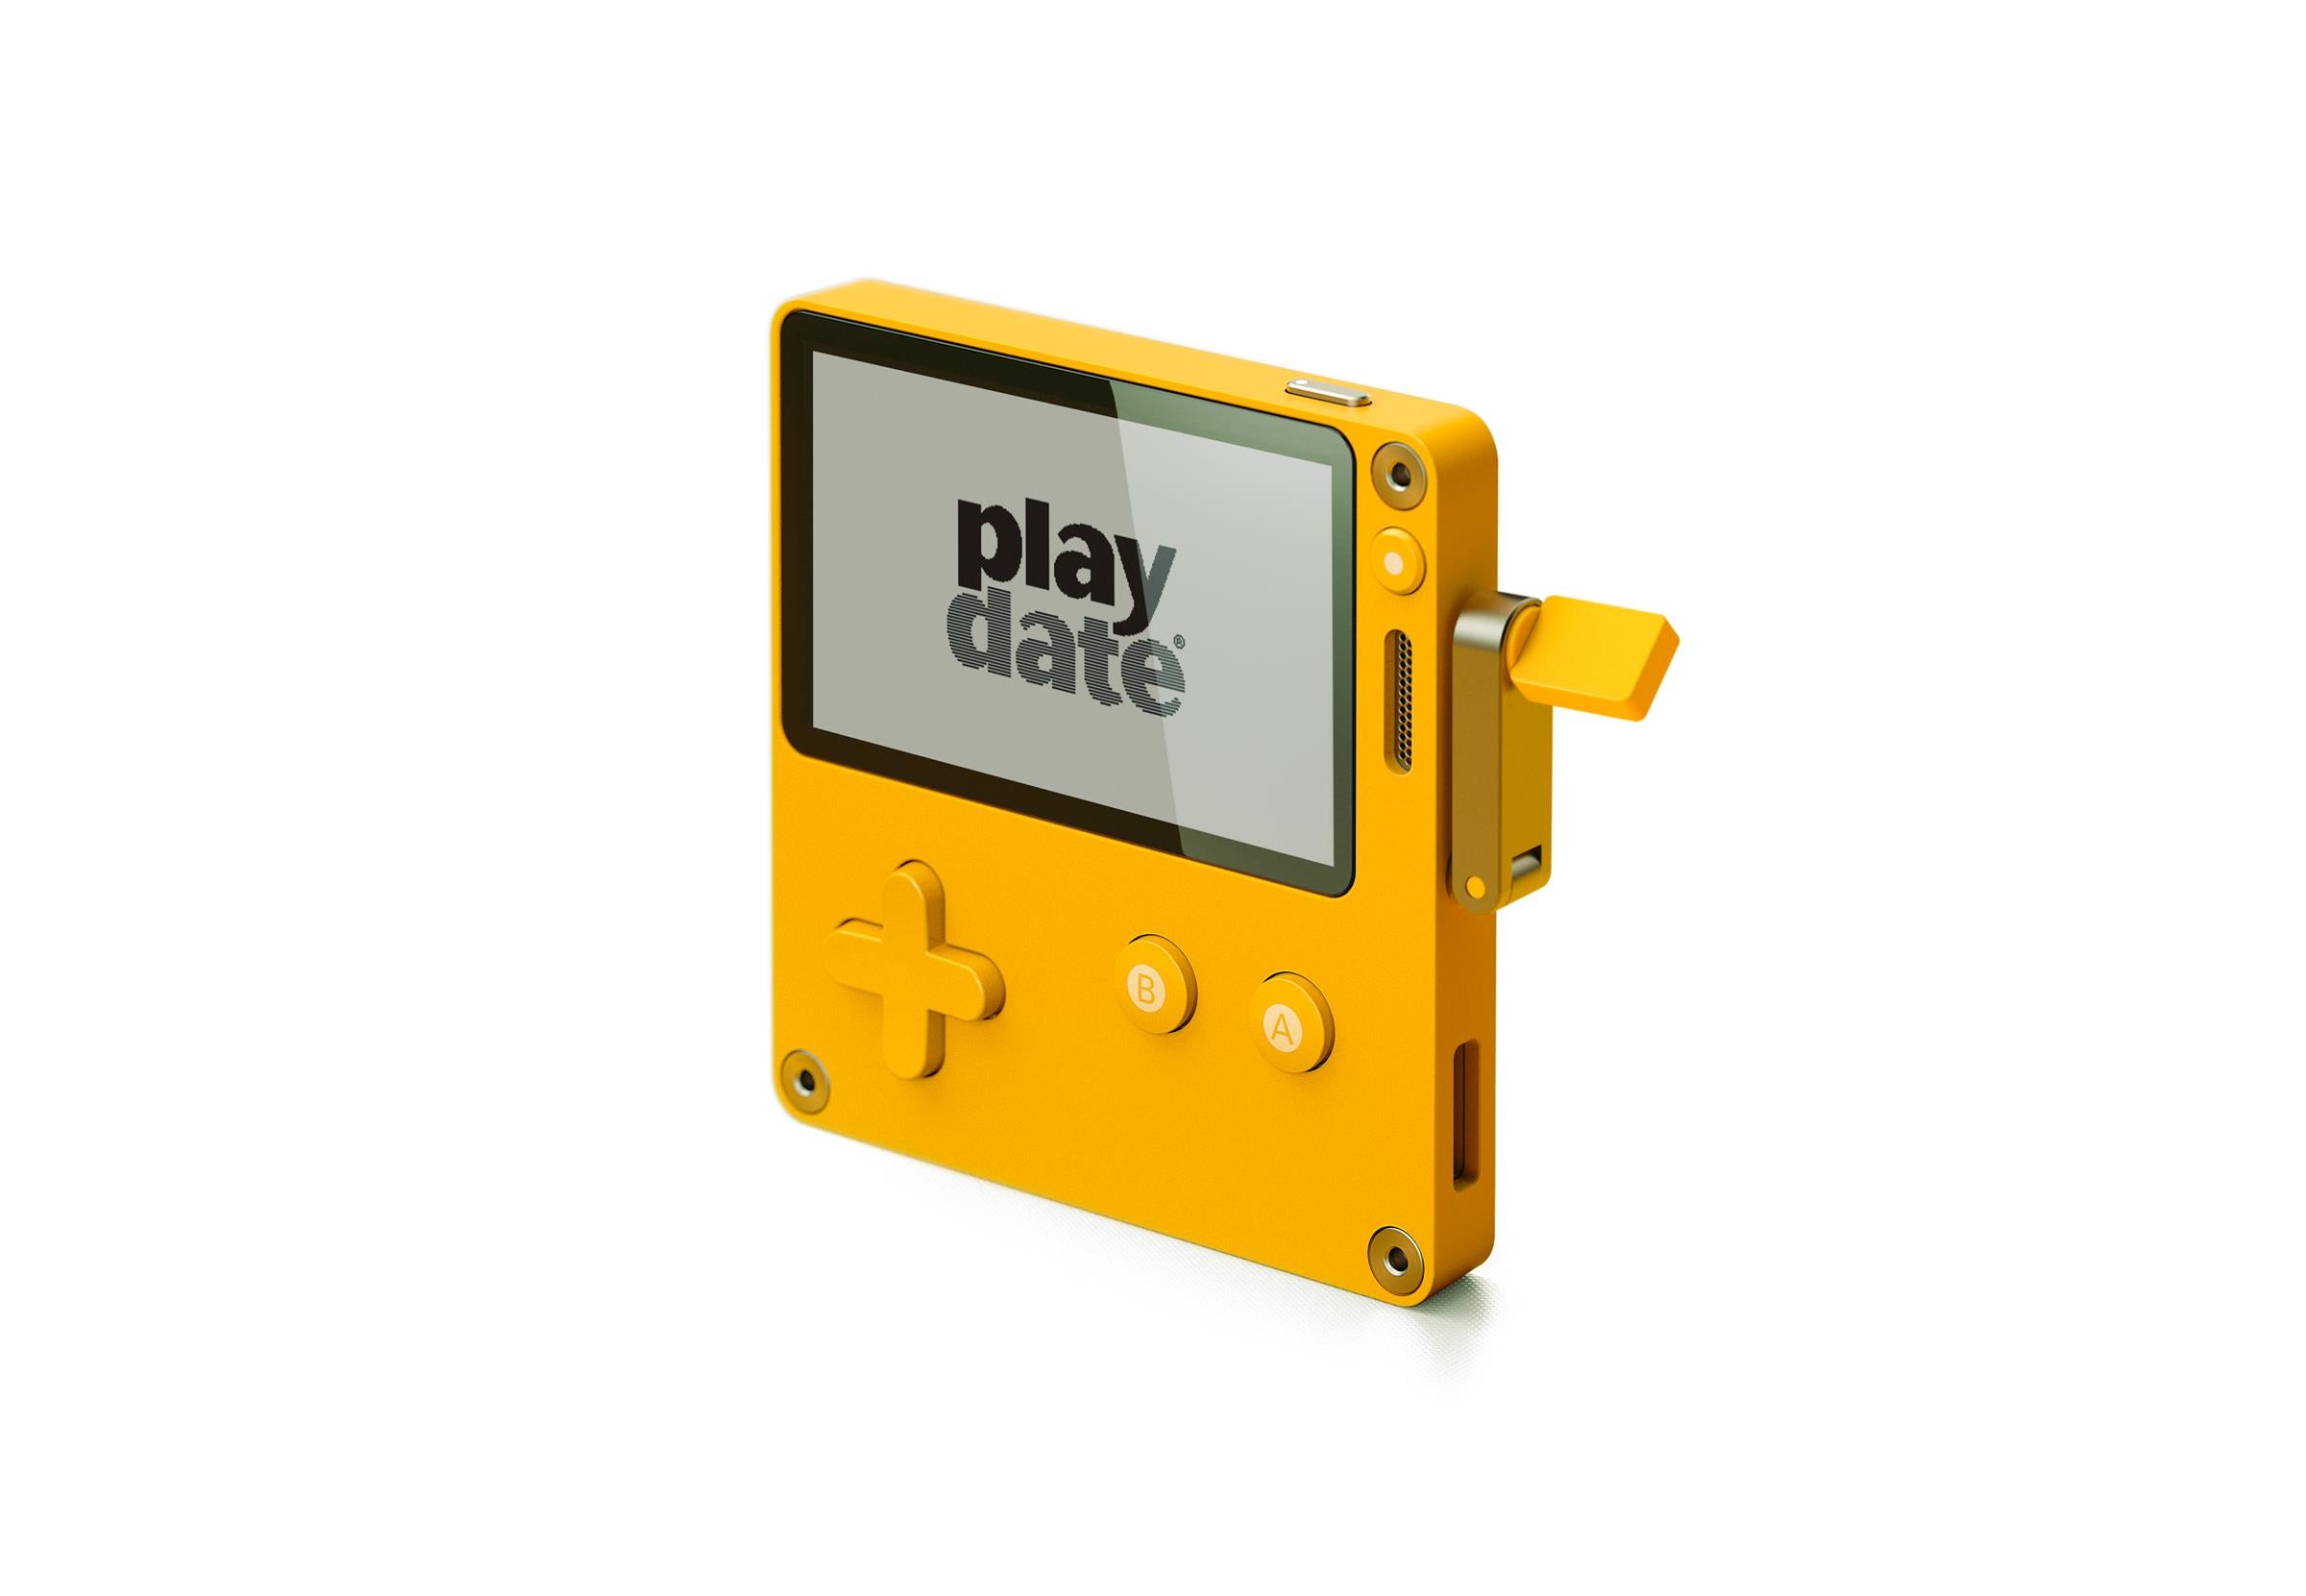 Image for Pre-orders for Playdate, the console with a crank, open in July